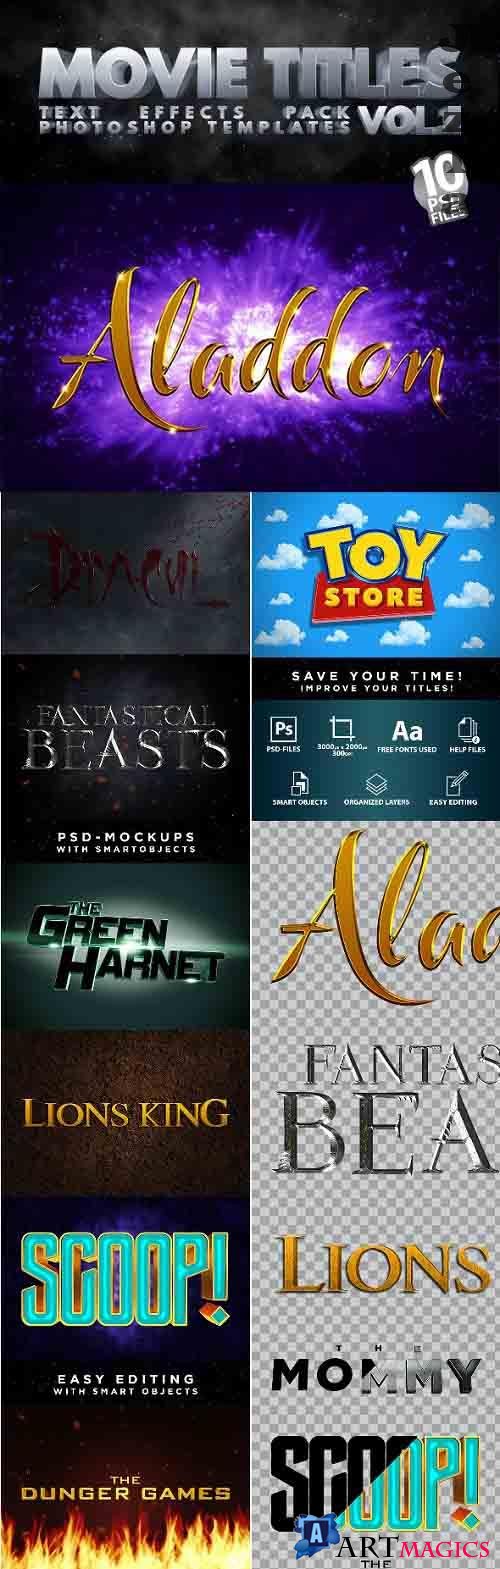 MOVIE TITLES - Vol.1 | Text-Effects/Mockups | Template-Pack - 30111191